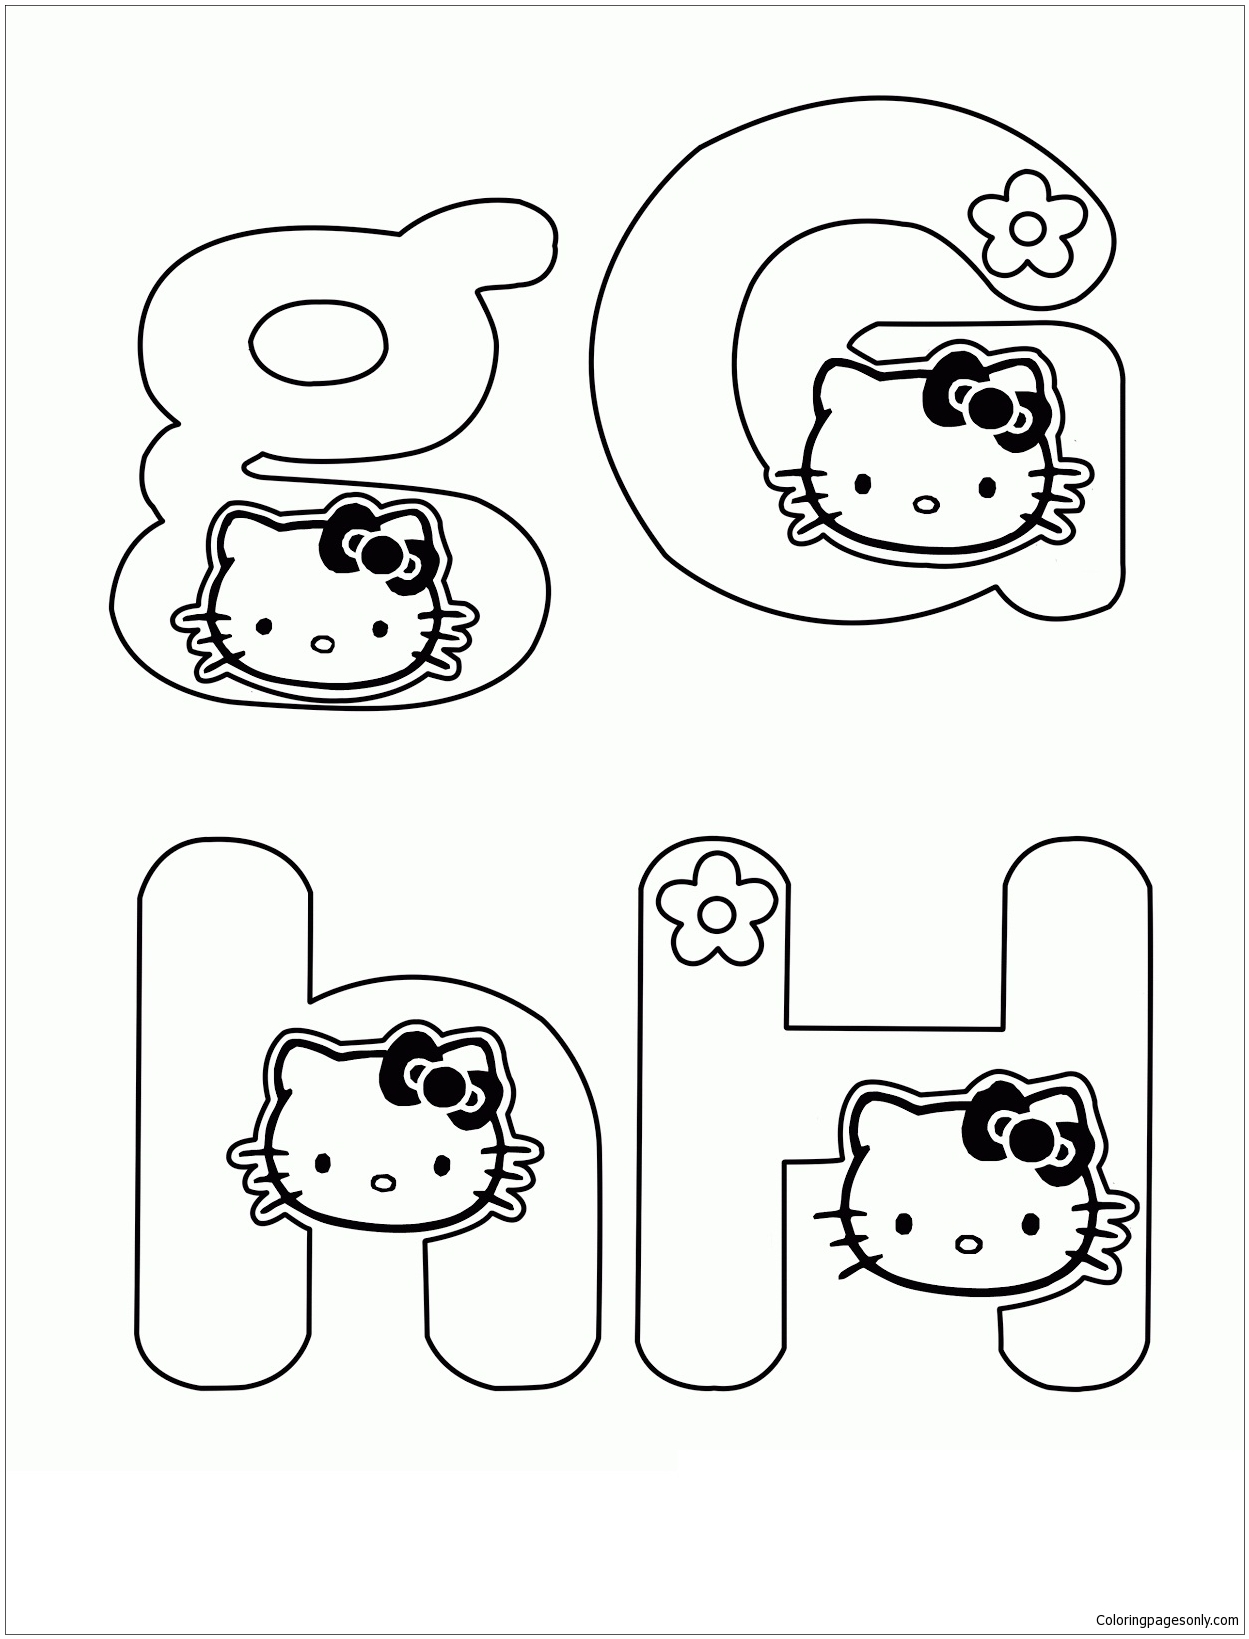 Hello Kittys And Baby Doll Coloring Page - Free Printable Coloring Pages